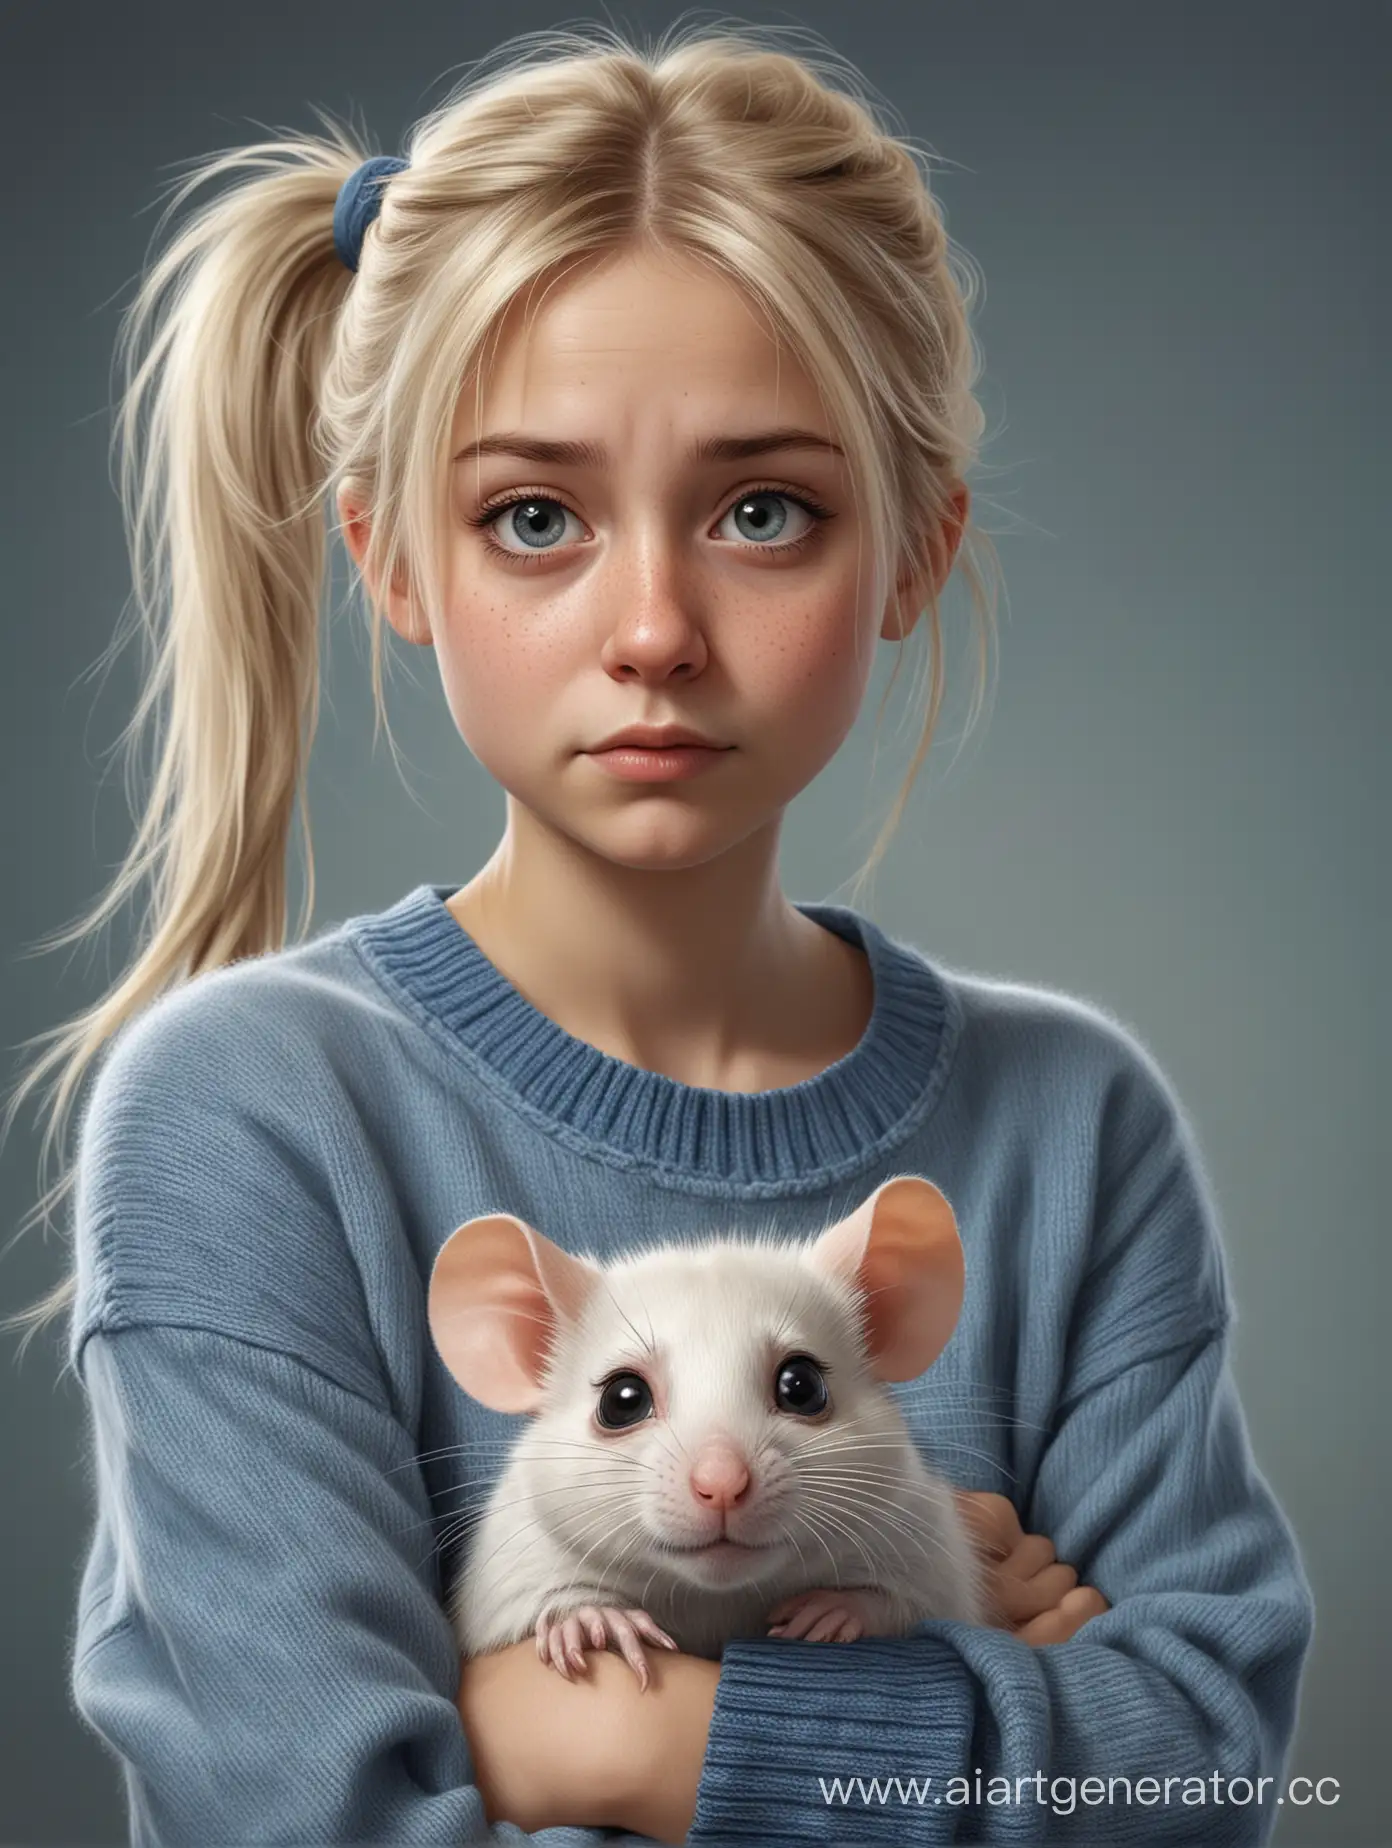 Displeased-Blond-Girl-with-Freckles-and-Rat-on-Shoulder-in-Realistic-Portrait